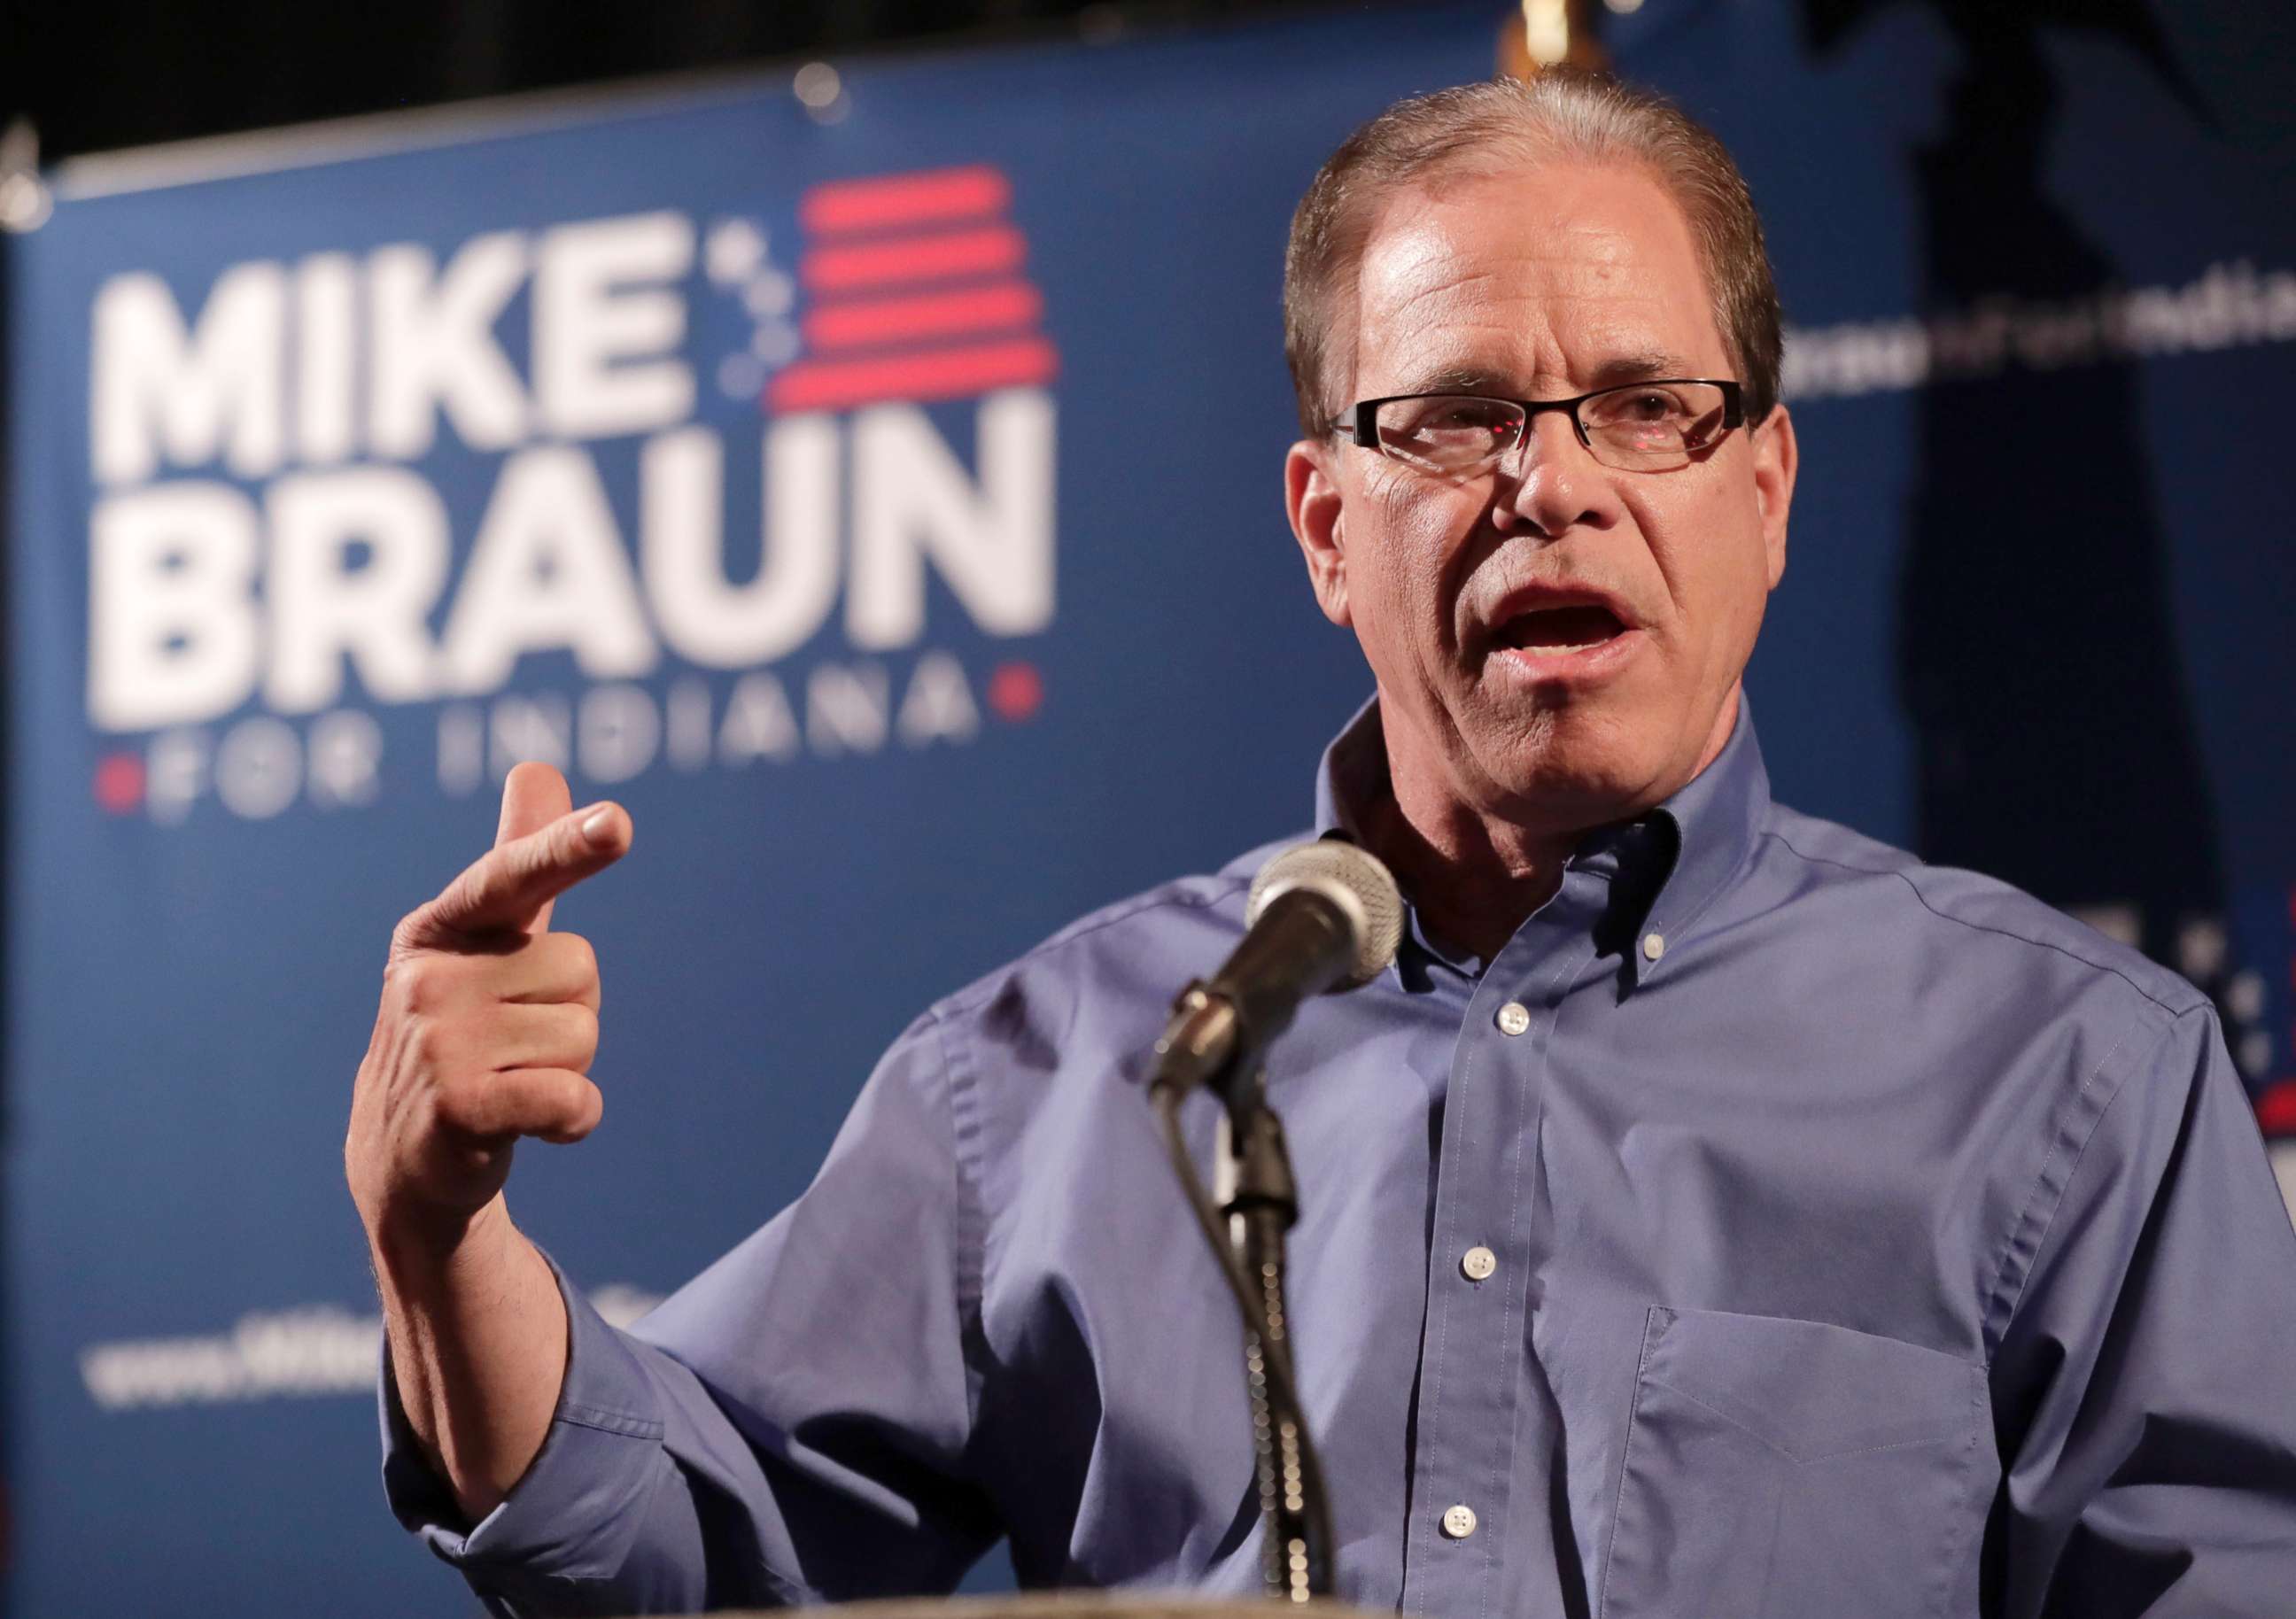 PHOTO: Republican Senate candidate Mike Braun thanks supporters after winning the republican primary in Whitestown, Ind., May 8, 2018.